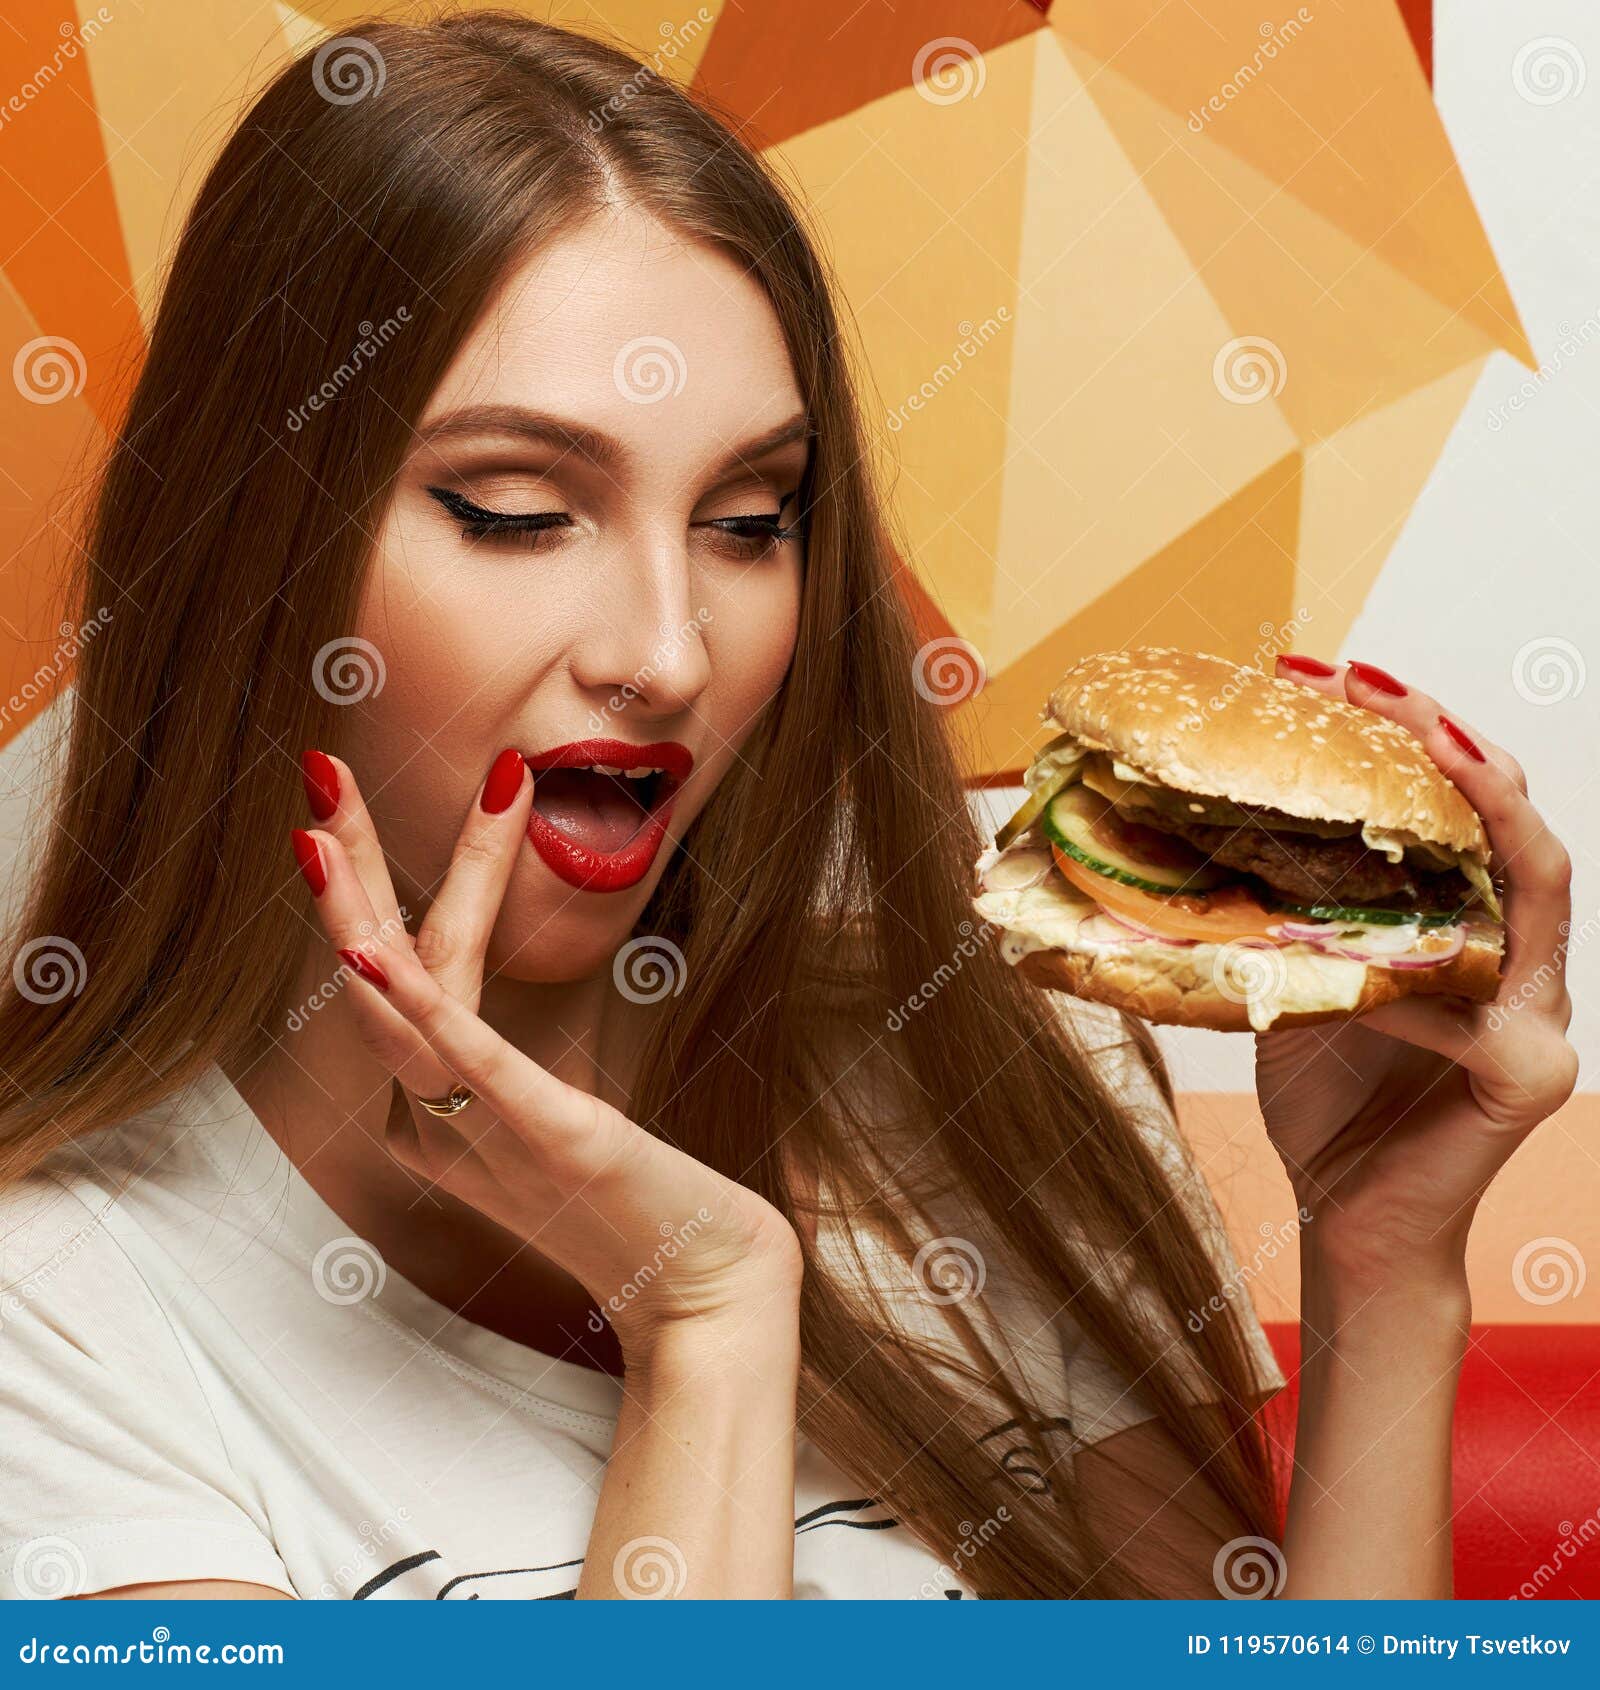 Sexy Poses With Food